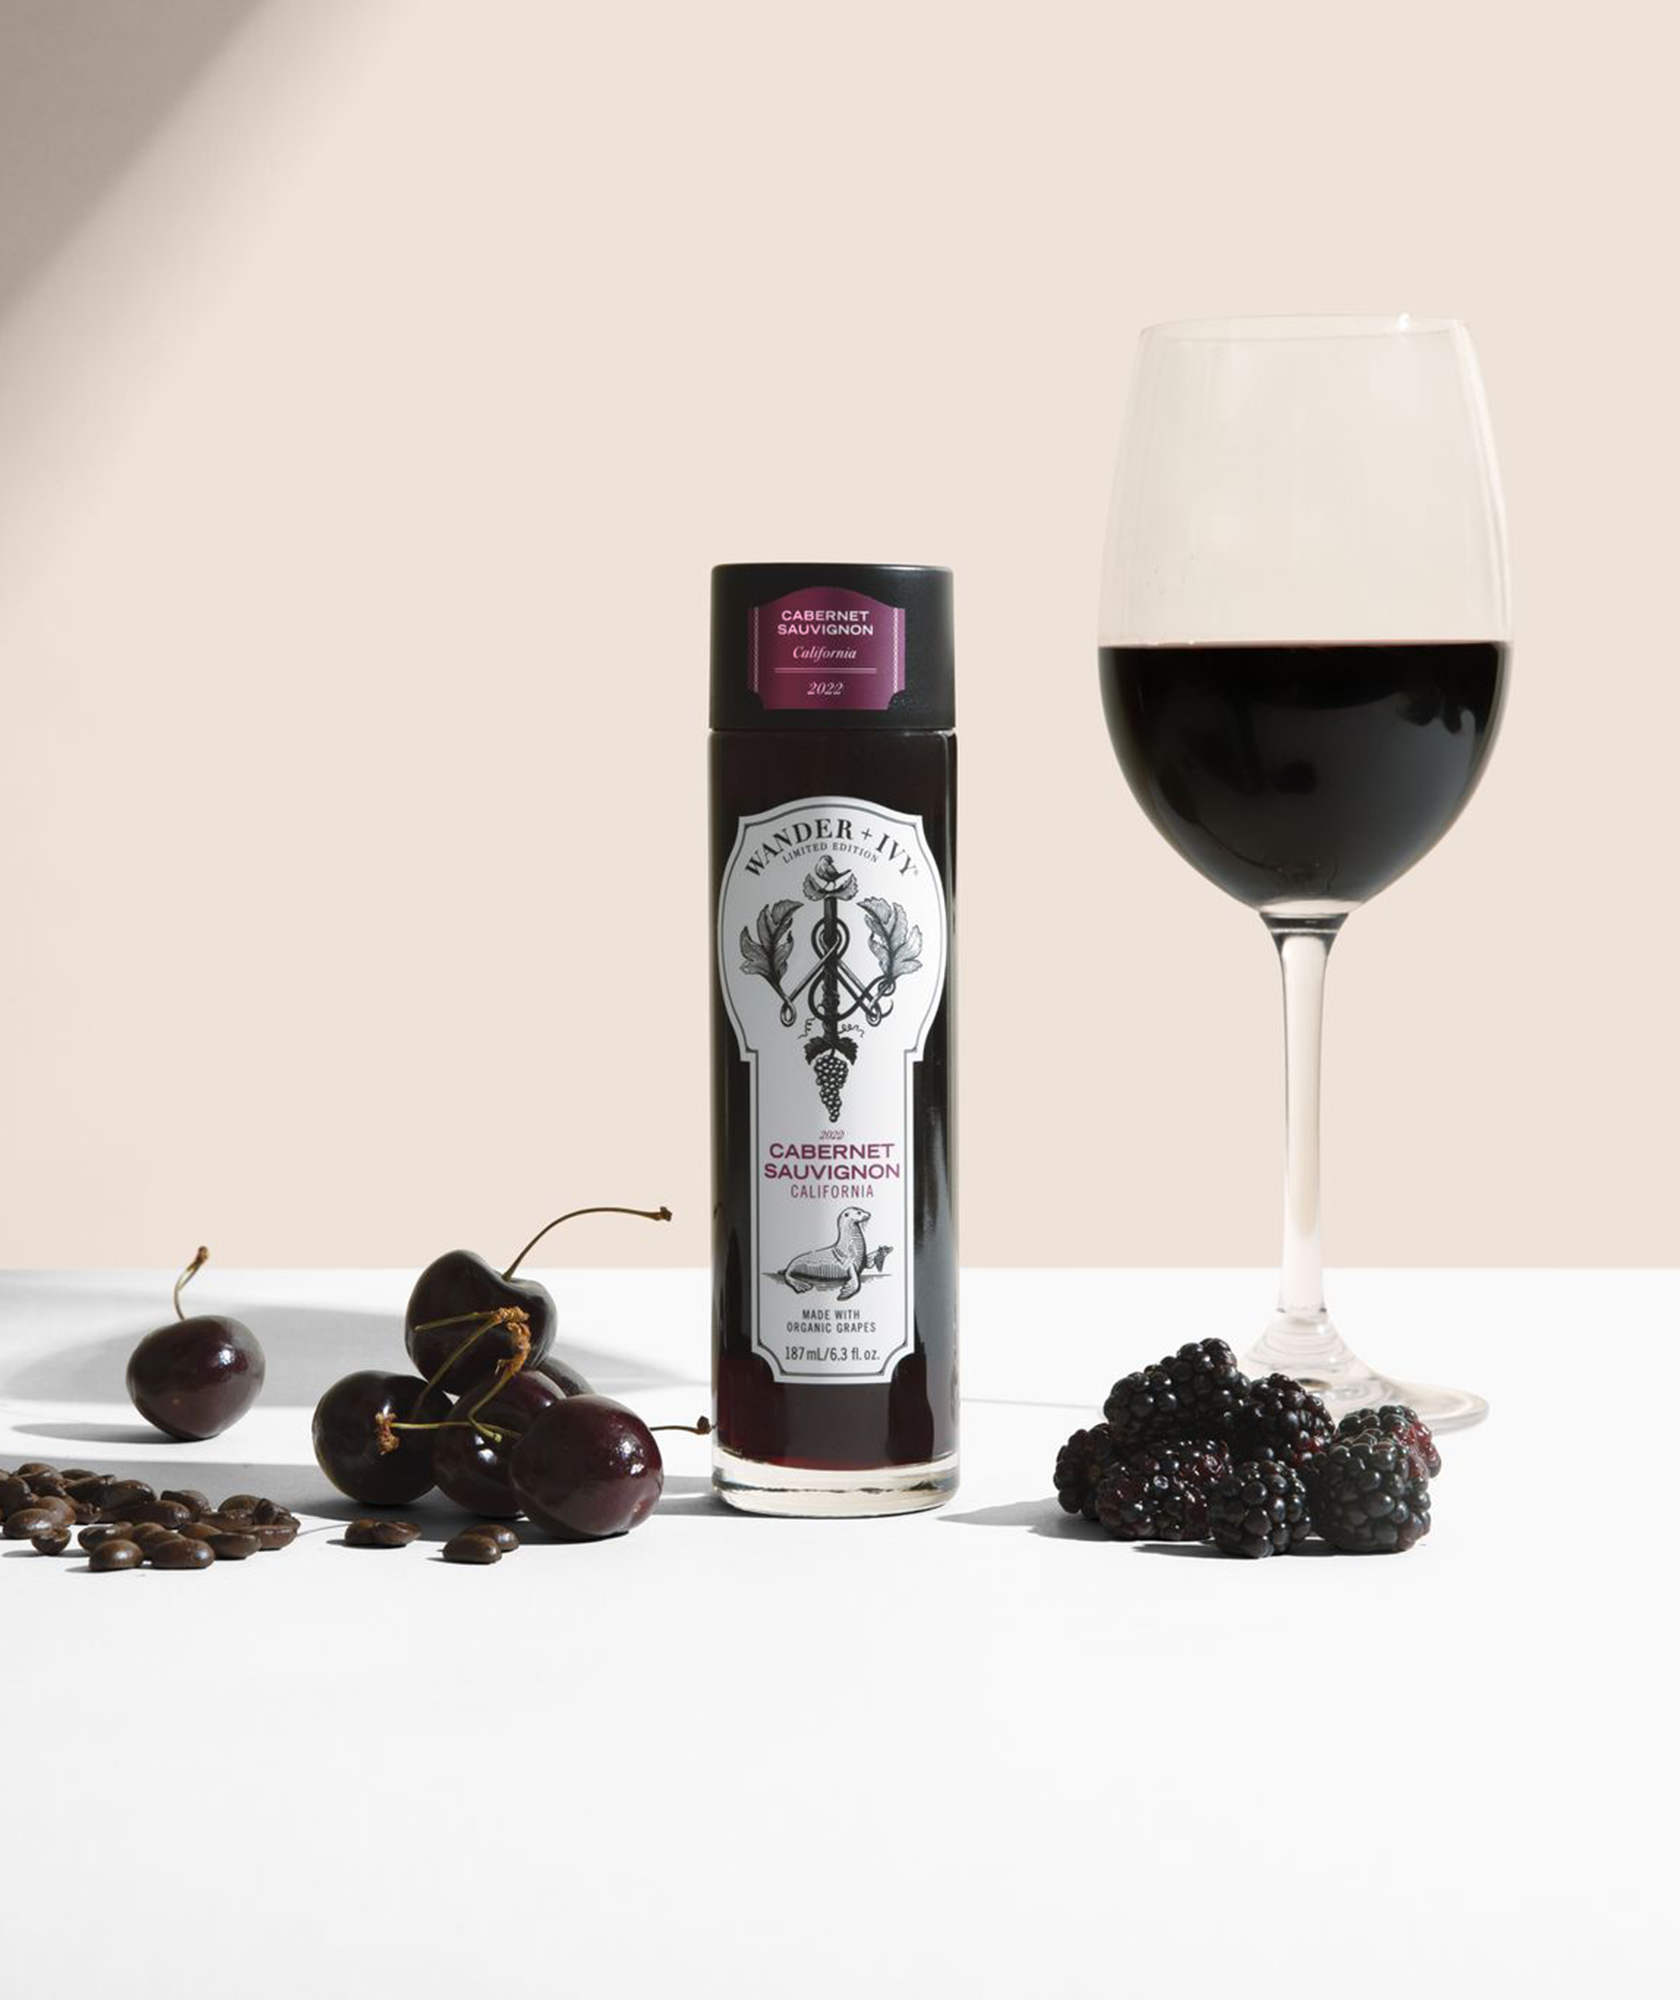 A single-serve bottle of Cabernet Sauvignon next to a filled wine glass, cherries, coffee beans, and blackberries